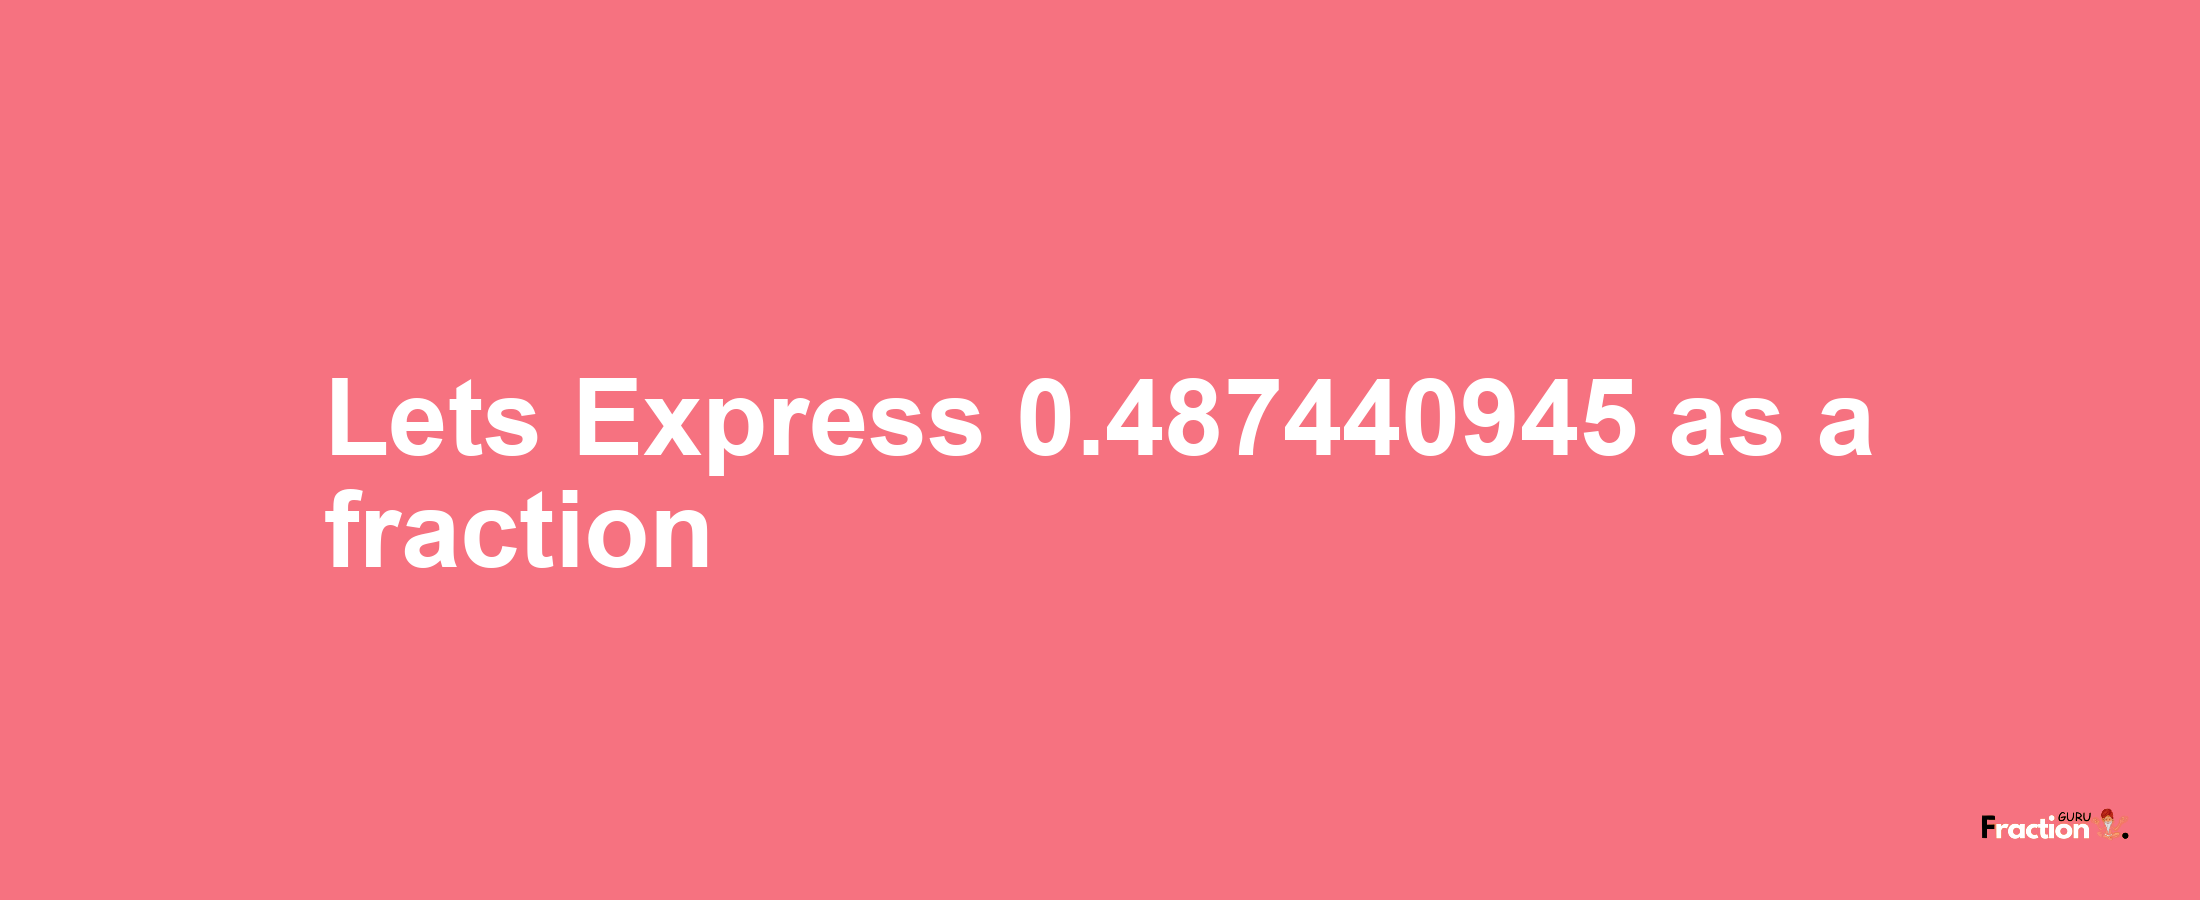 Lets Express 0.487440945 as afraction